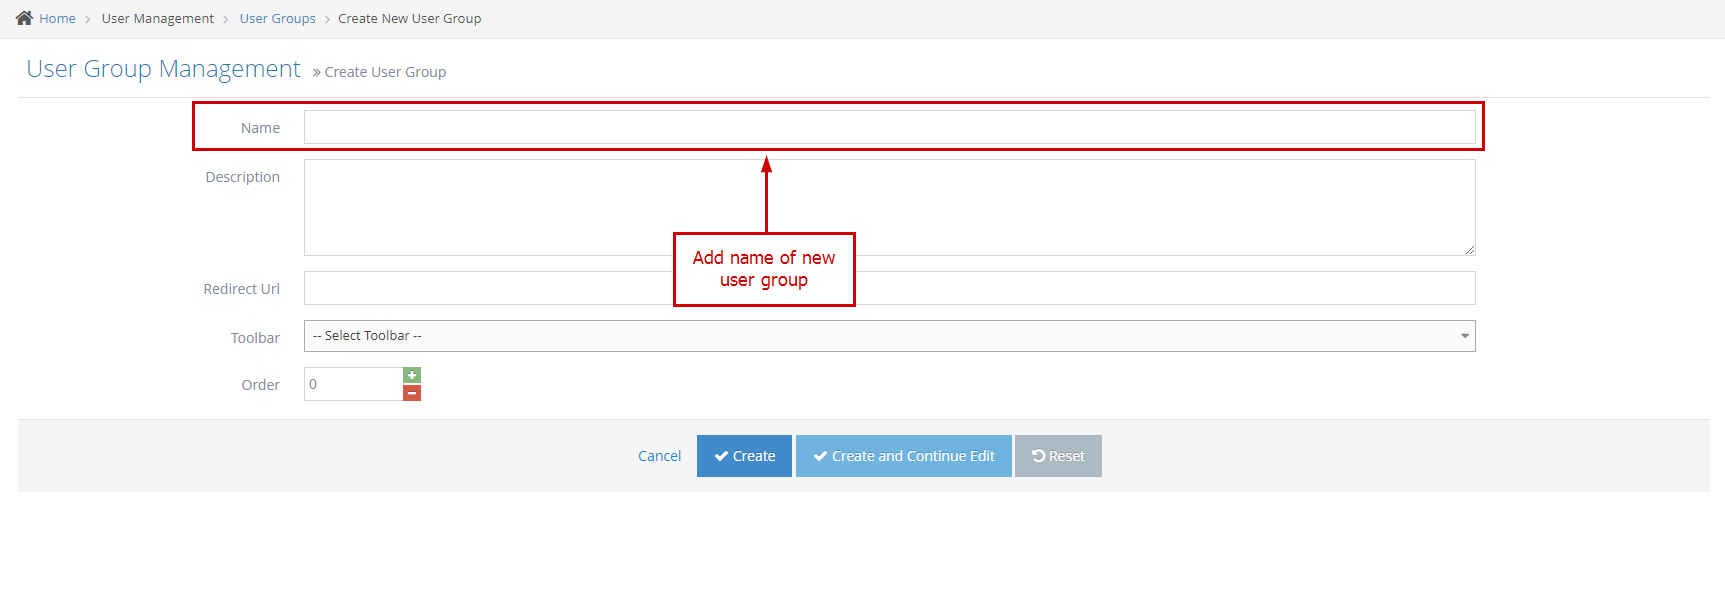 Group Redirects